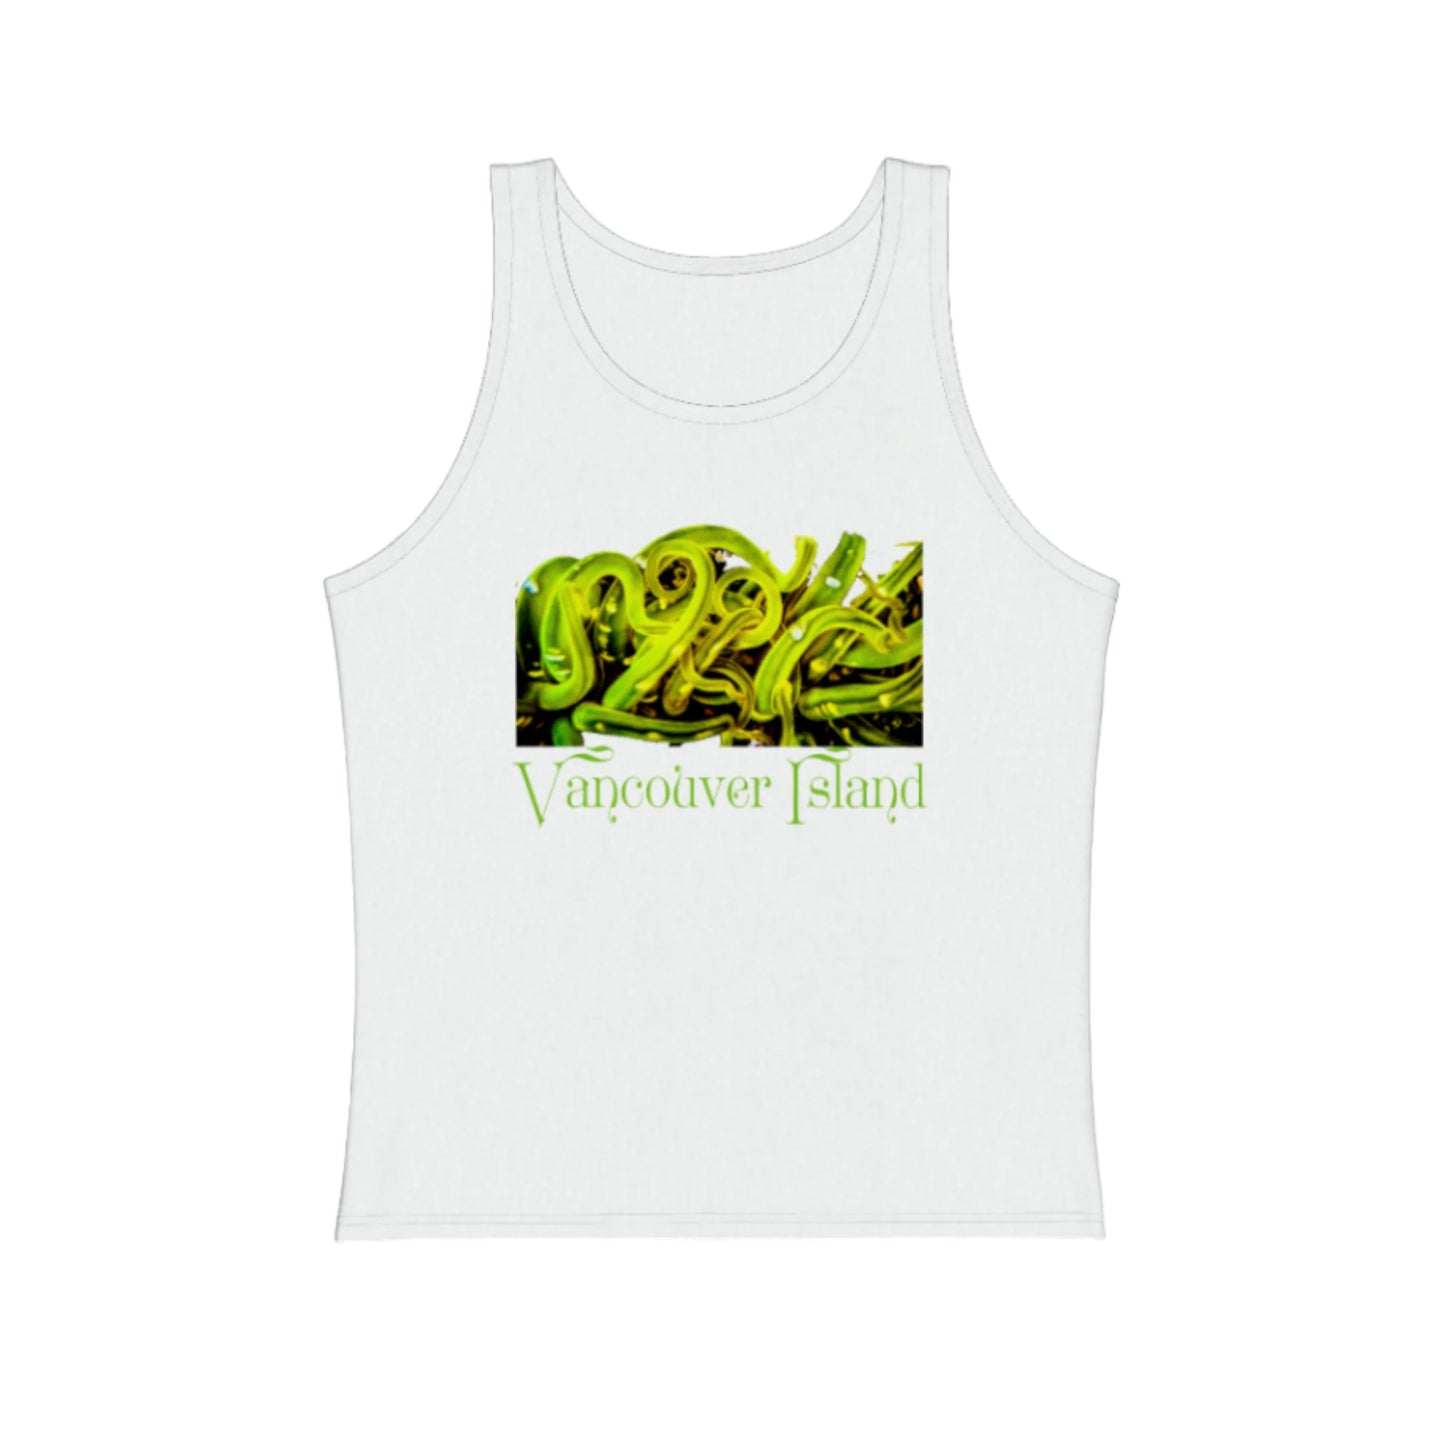 Sea Anemone Vancouver Island premium unisex tank top in white.  The green sea anemone is underwater on the front of the top. by van isle goddess dot com